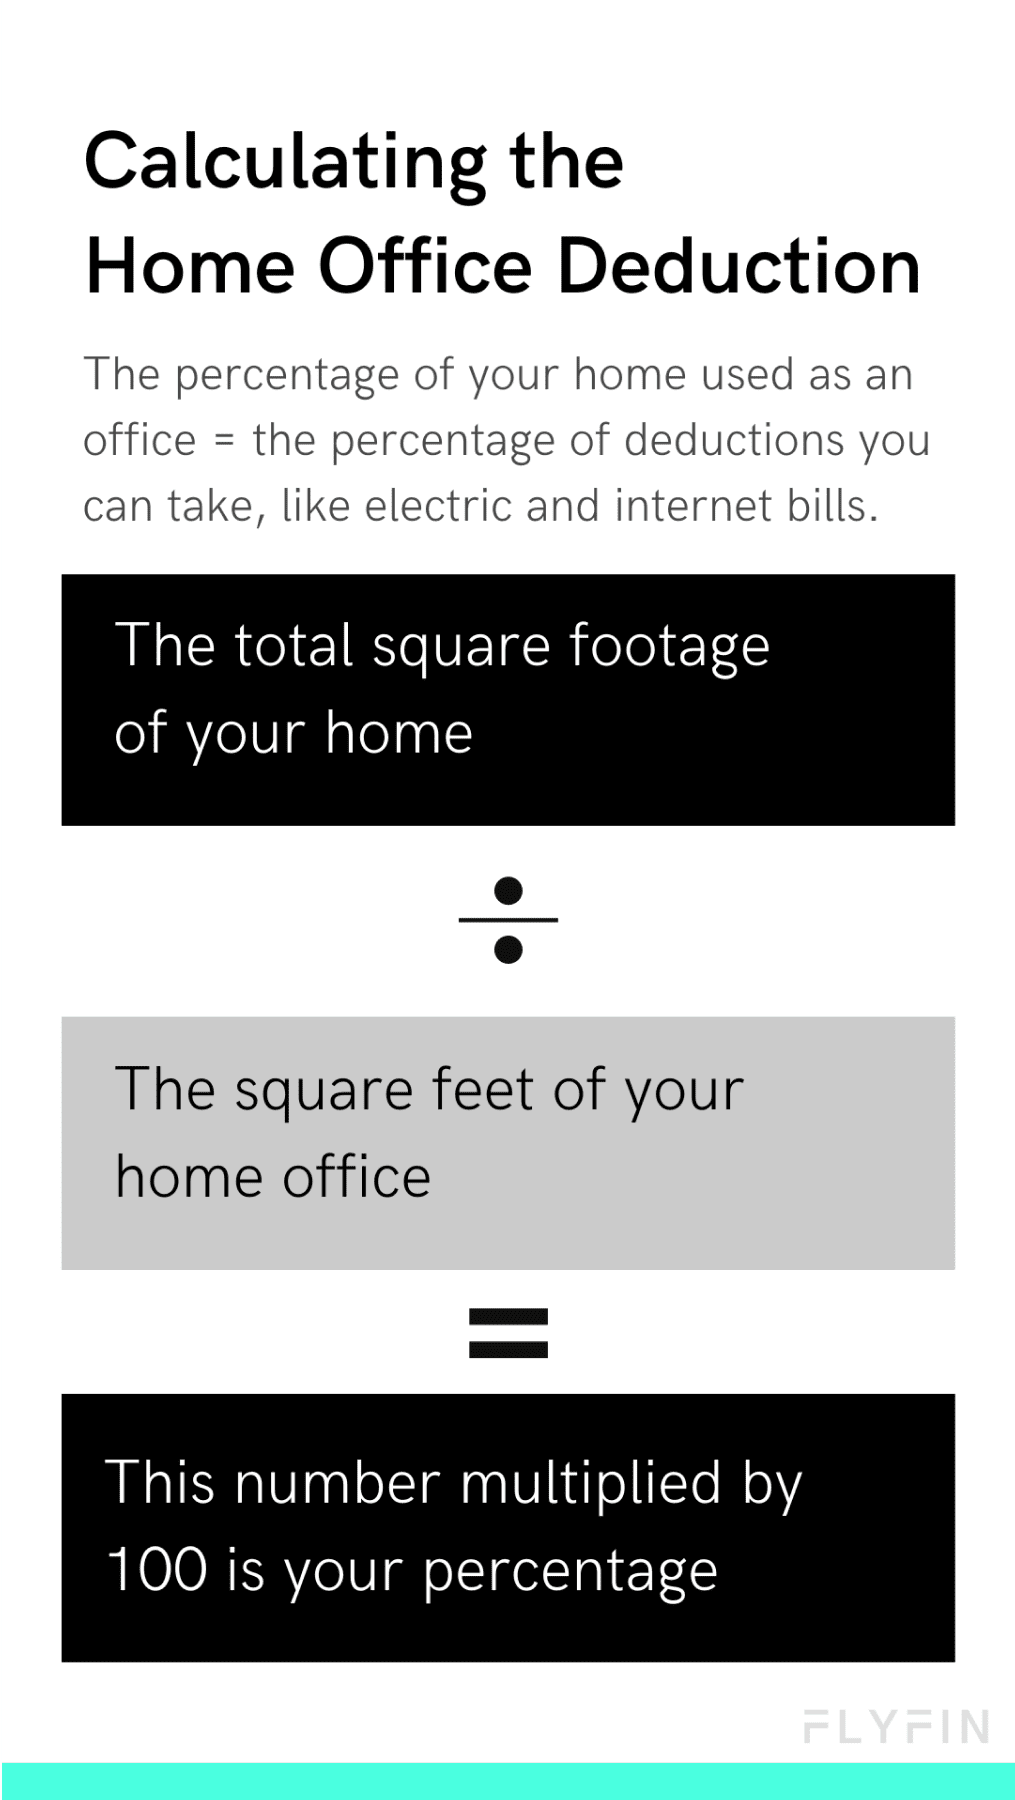 Image showing how to calculate home office deduction for taxes. Percentage of home used as office = percentage of deductions. Includes electric and internet bills.